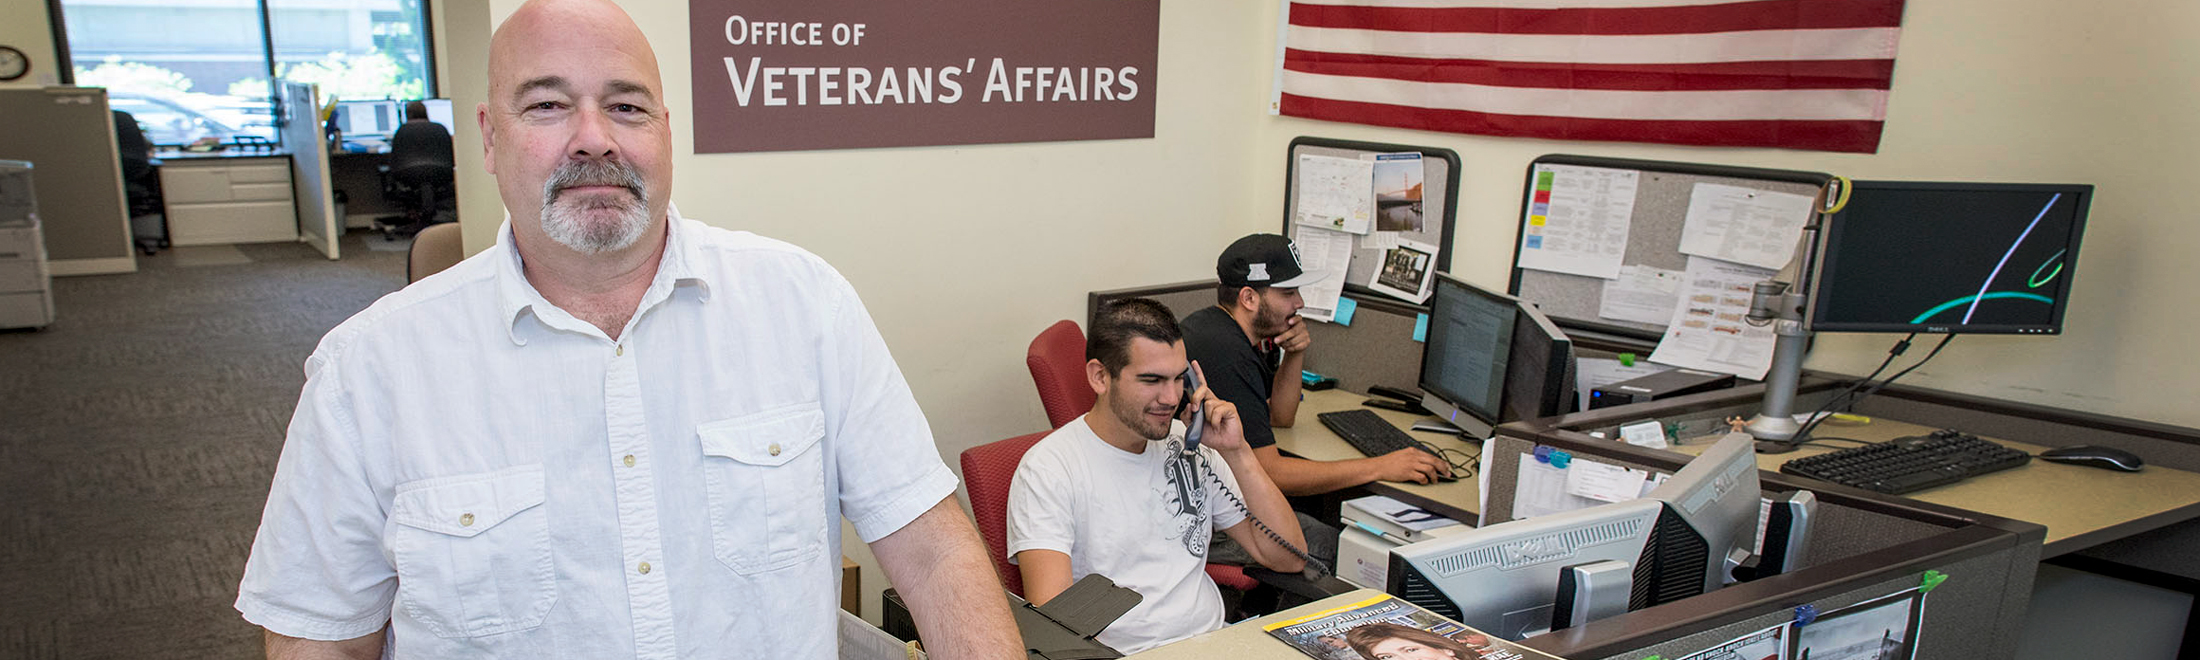 workers at an office of veterans' affairs